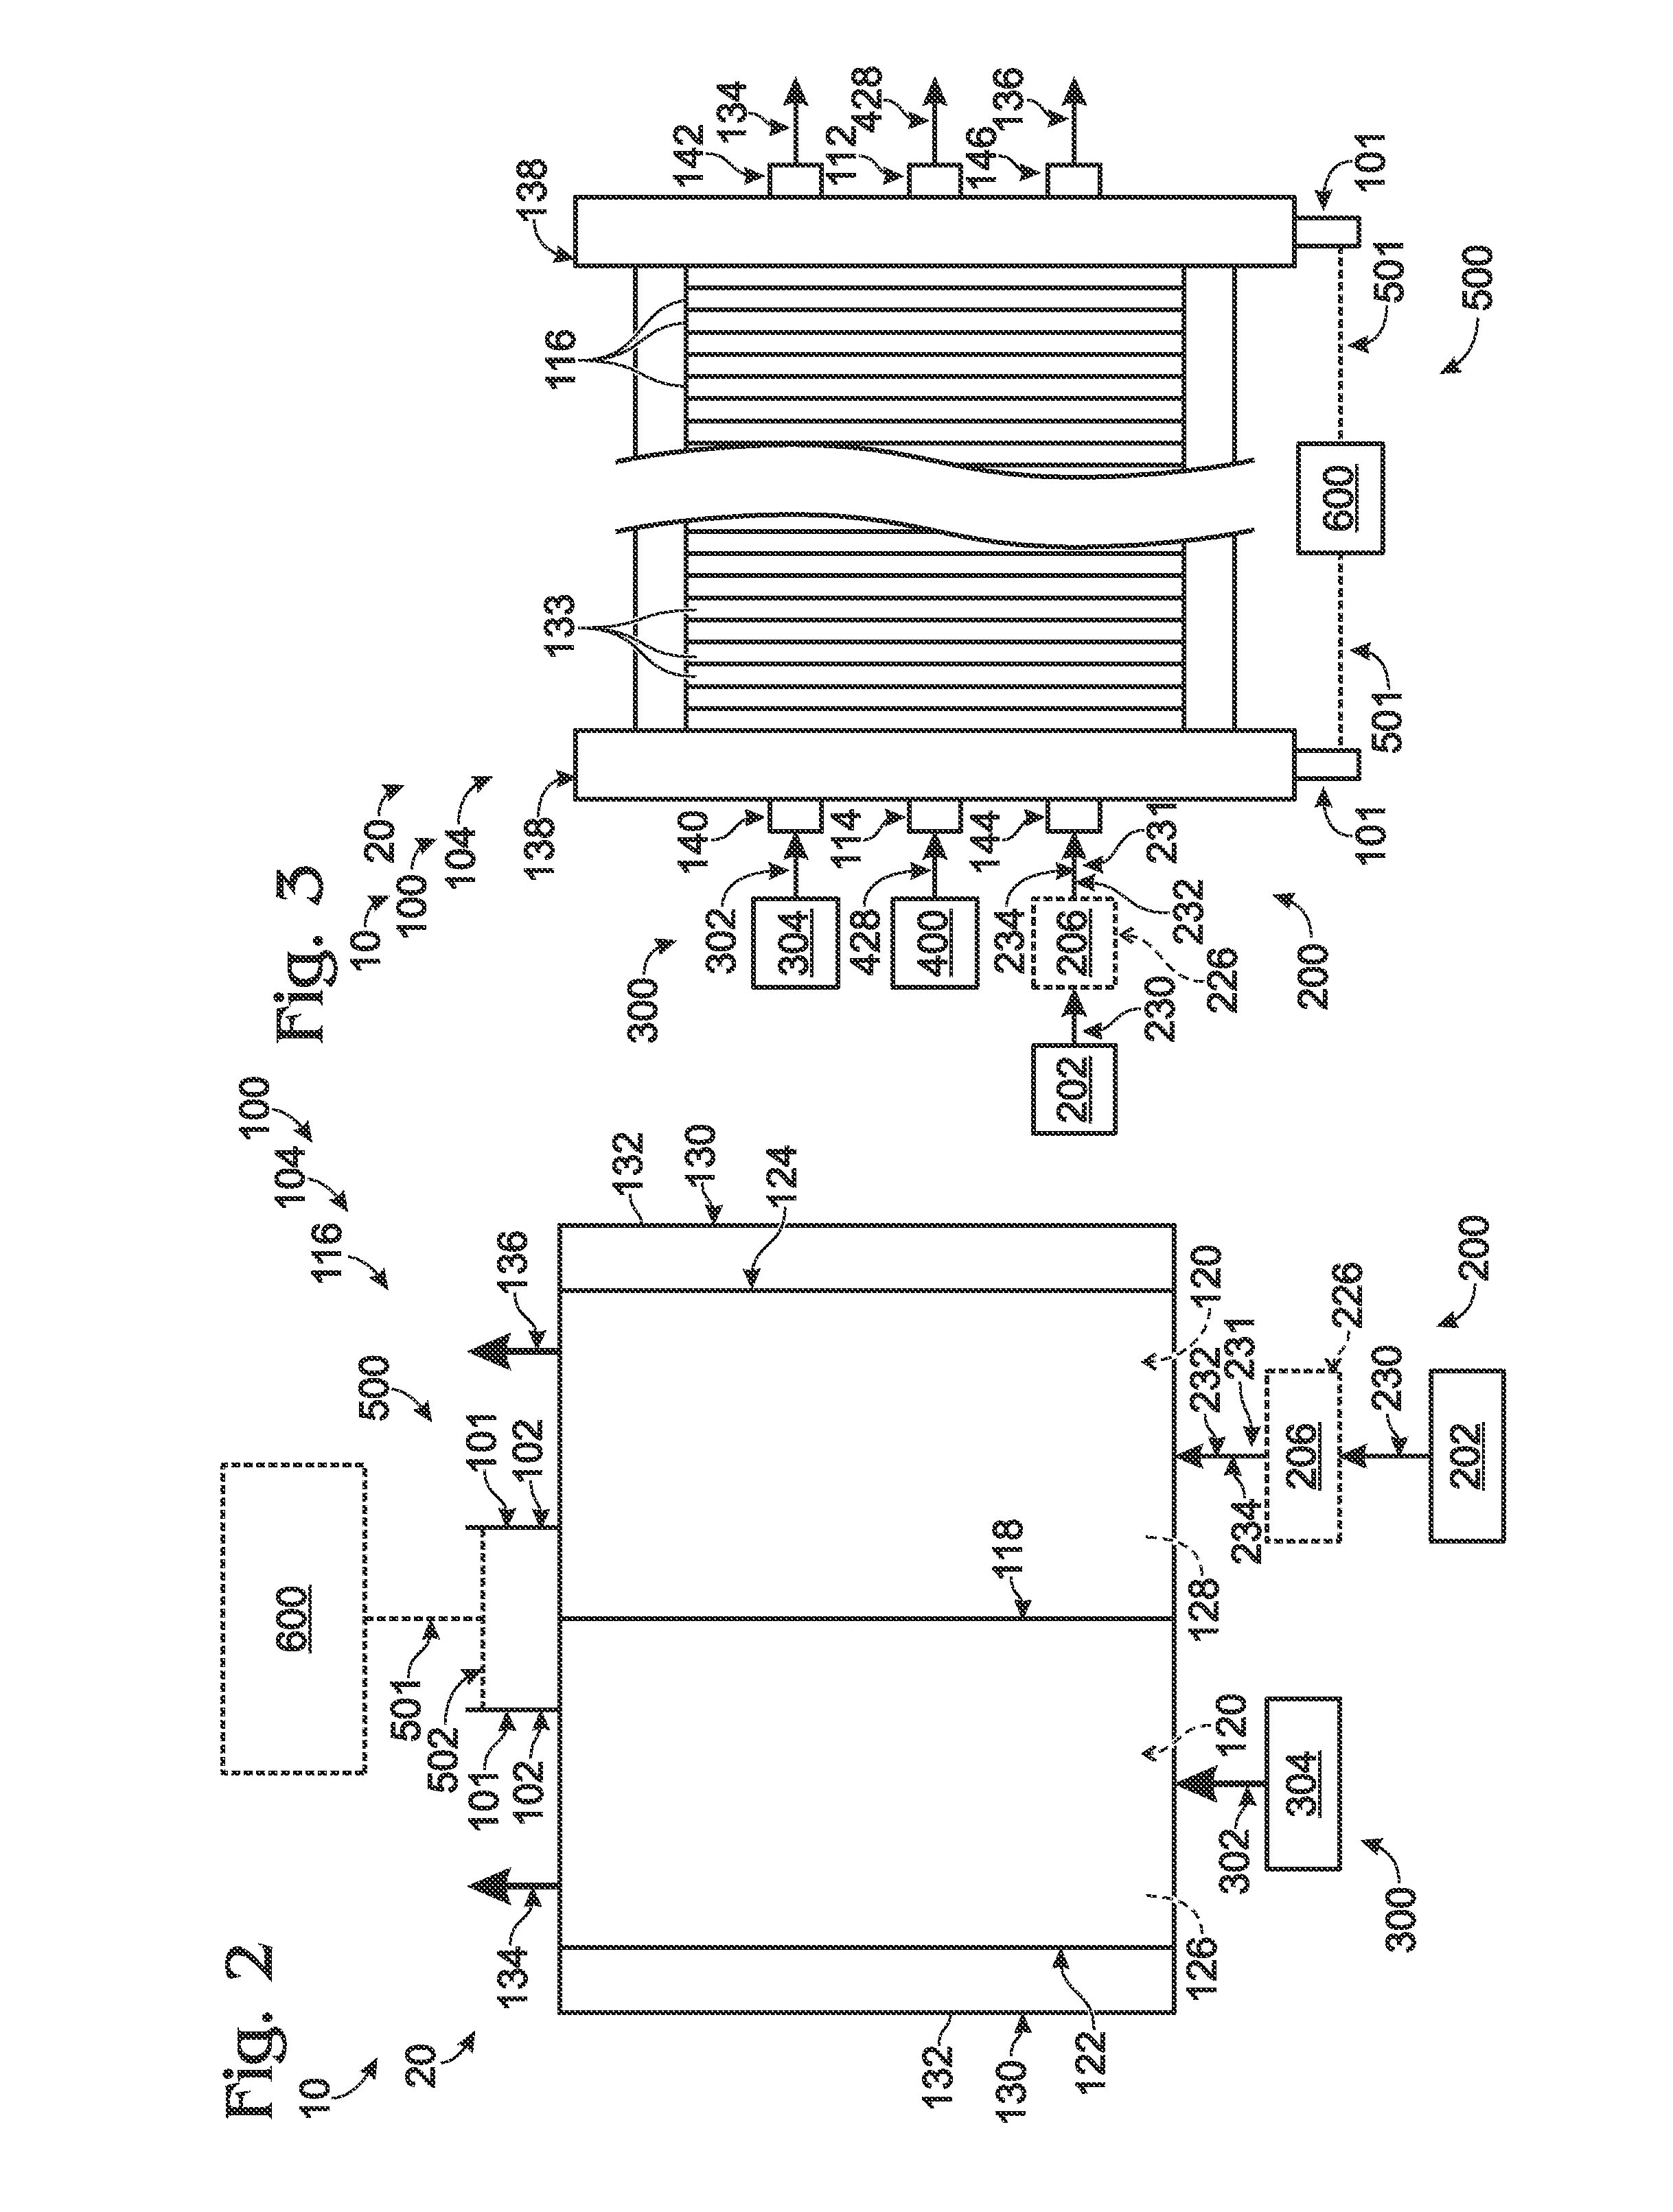 Systems and methods for fuel cell thermal management